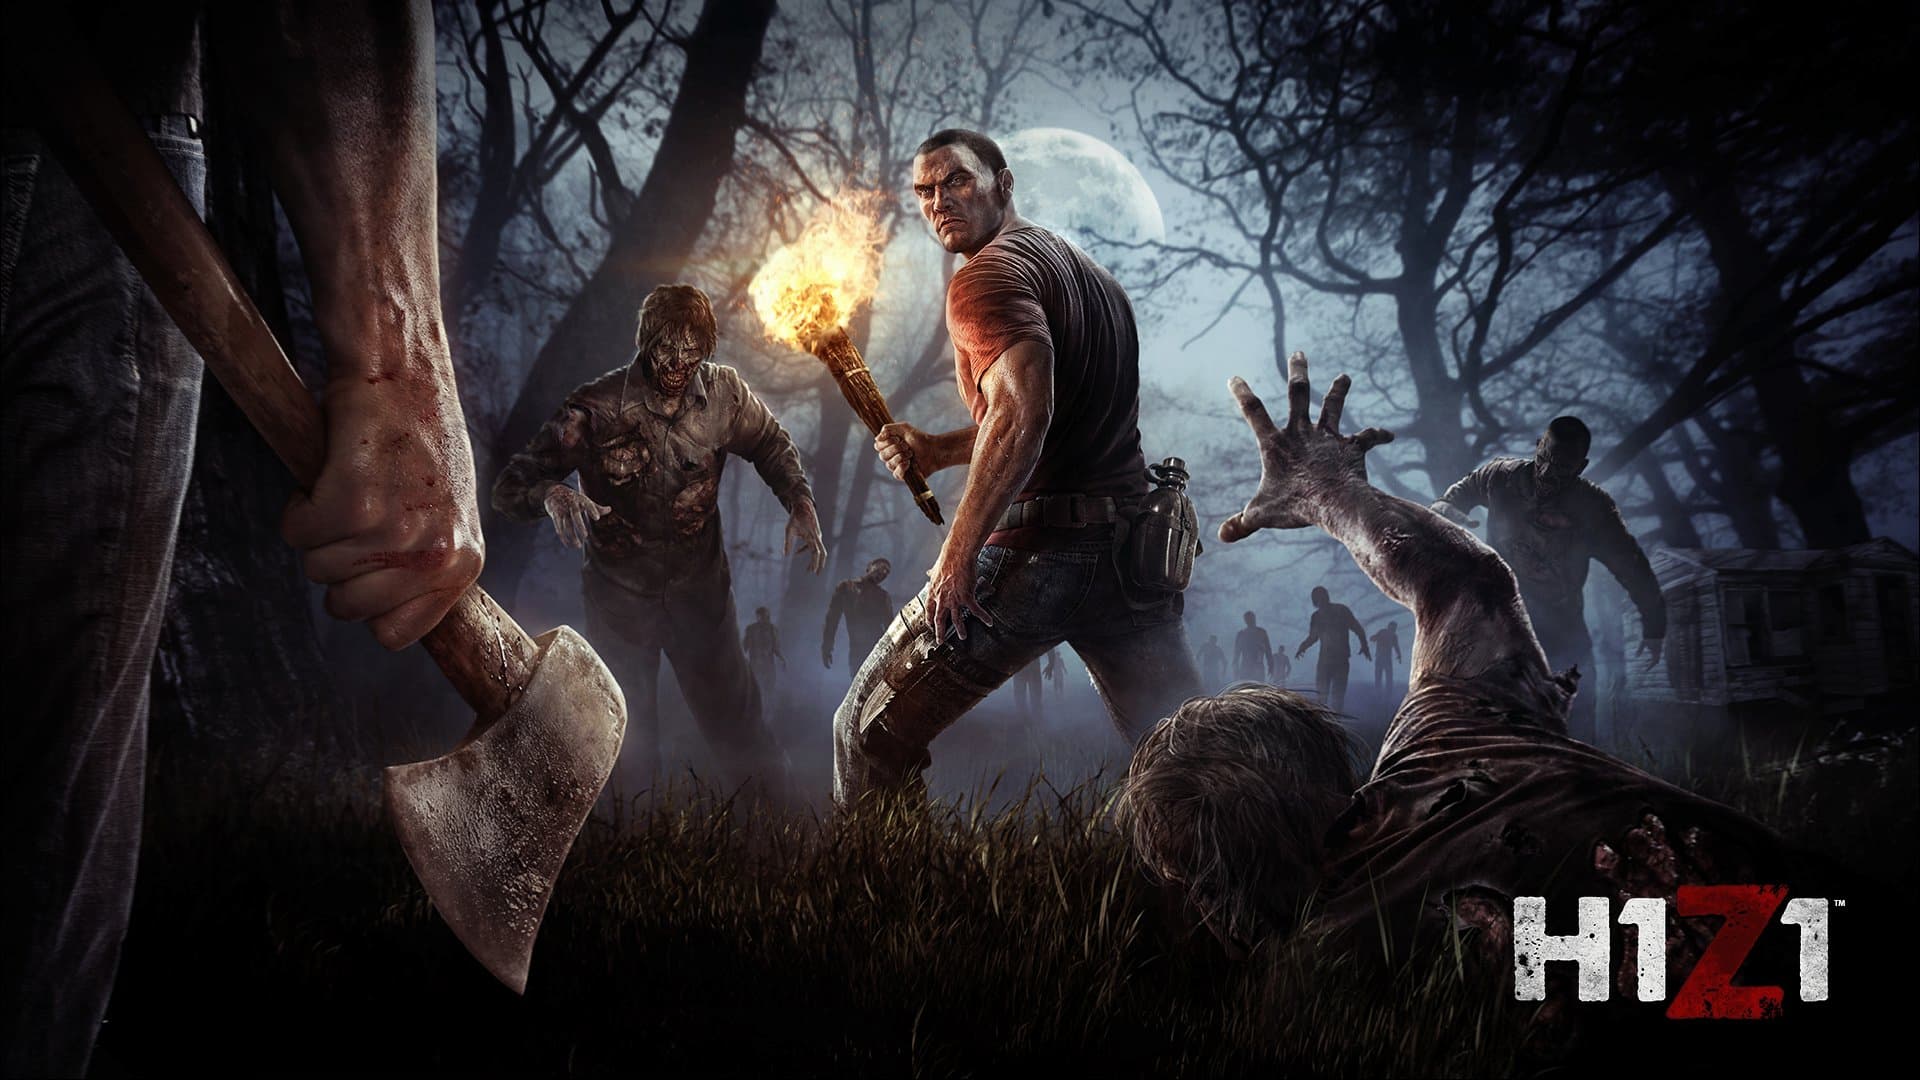 Battle Royale Pioneer: How H1Z1 Became a Breakthrough